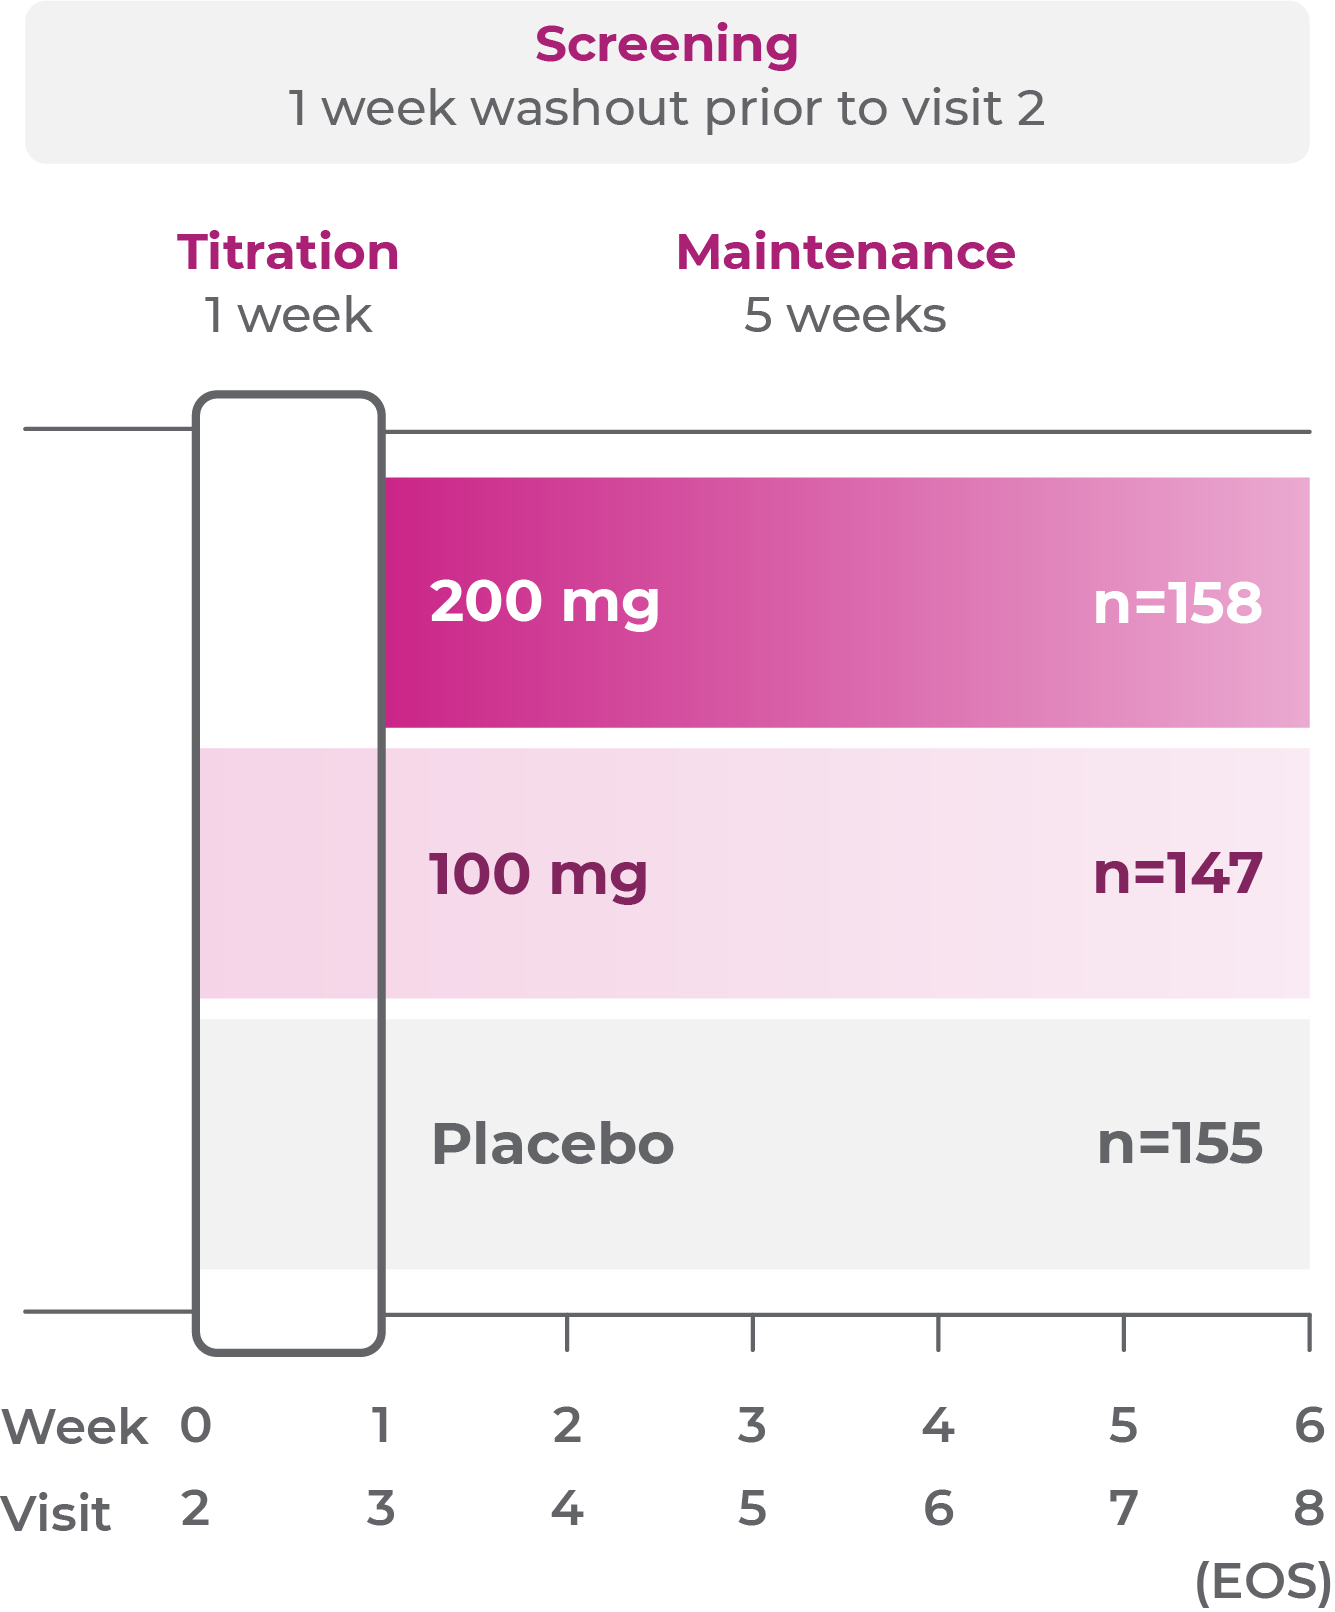 chart showing a screening period, 1-week titration, and 5-week maintenance in children for 100-200 mg and placebo doses over a 6-week period